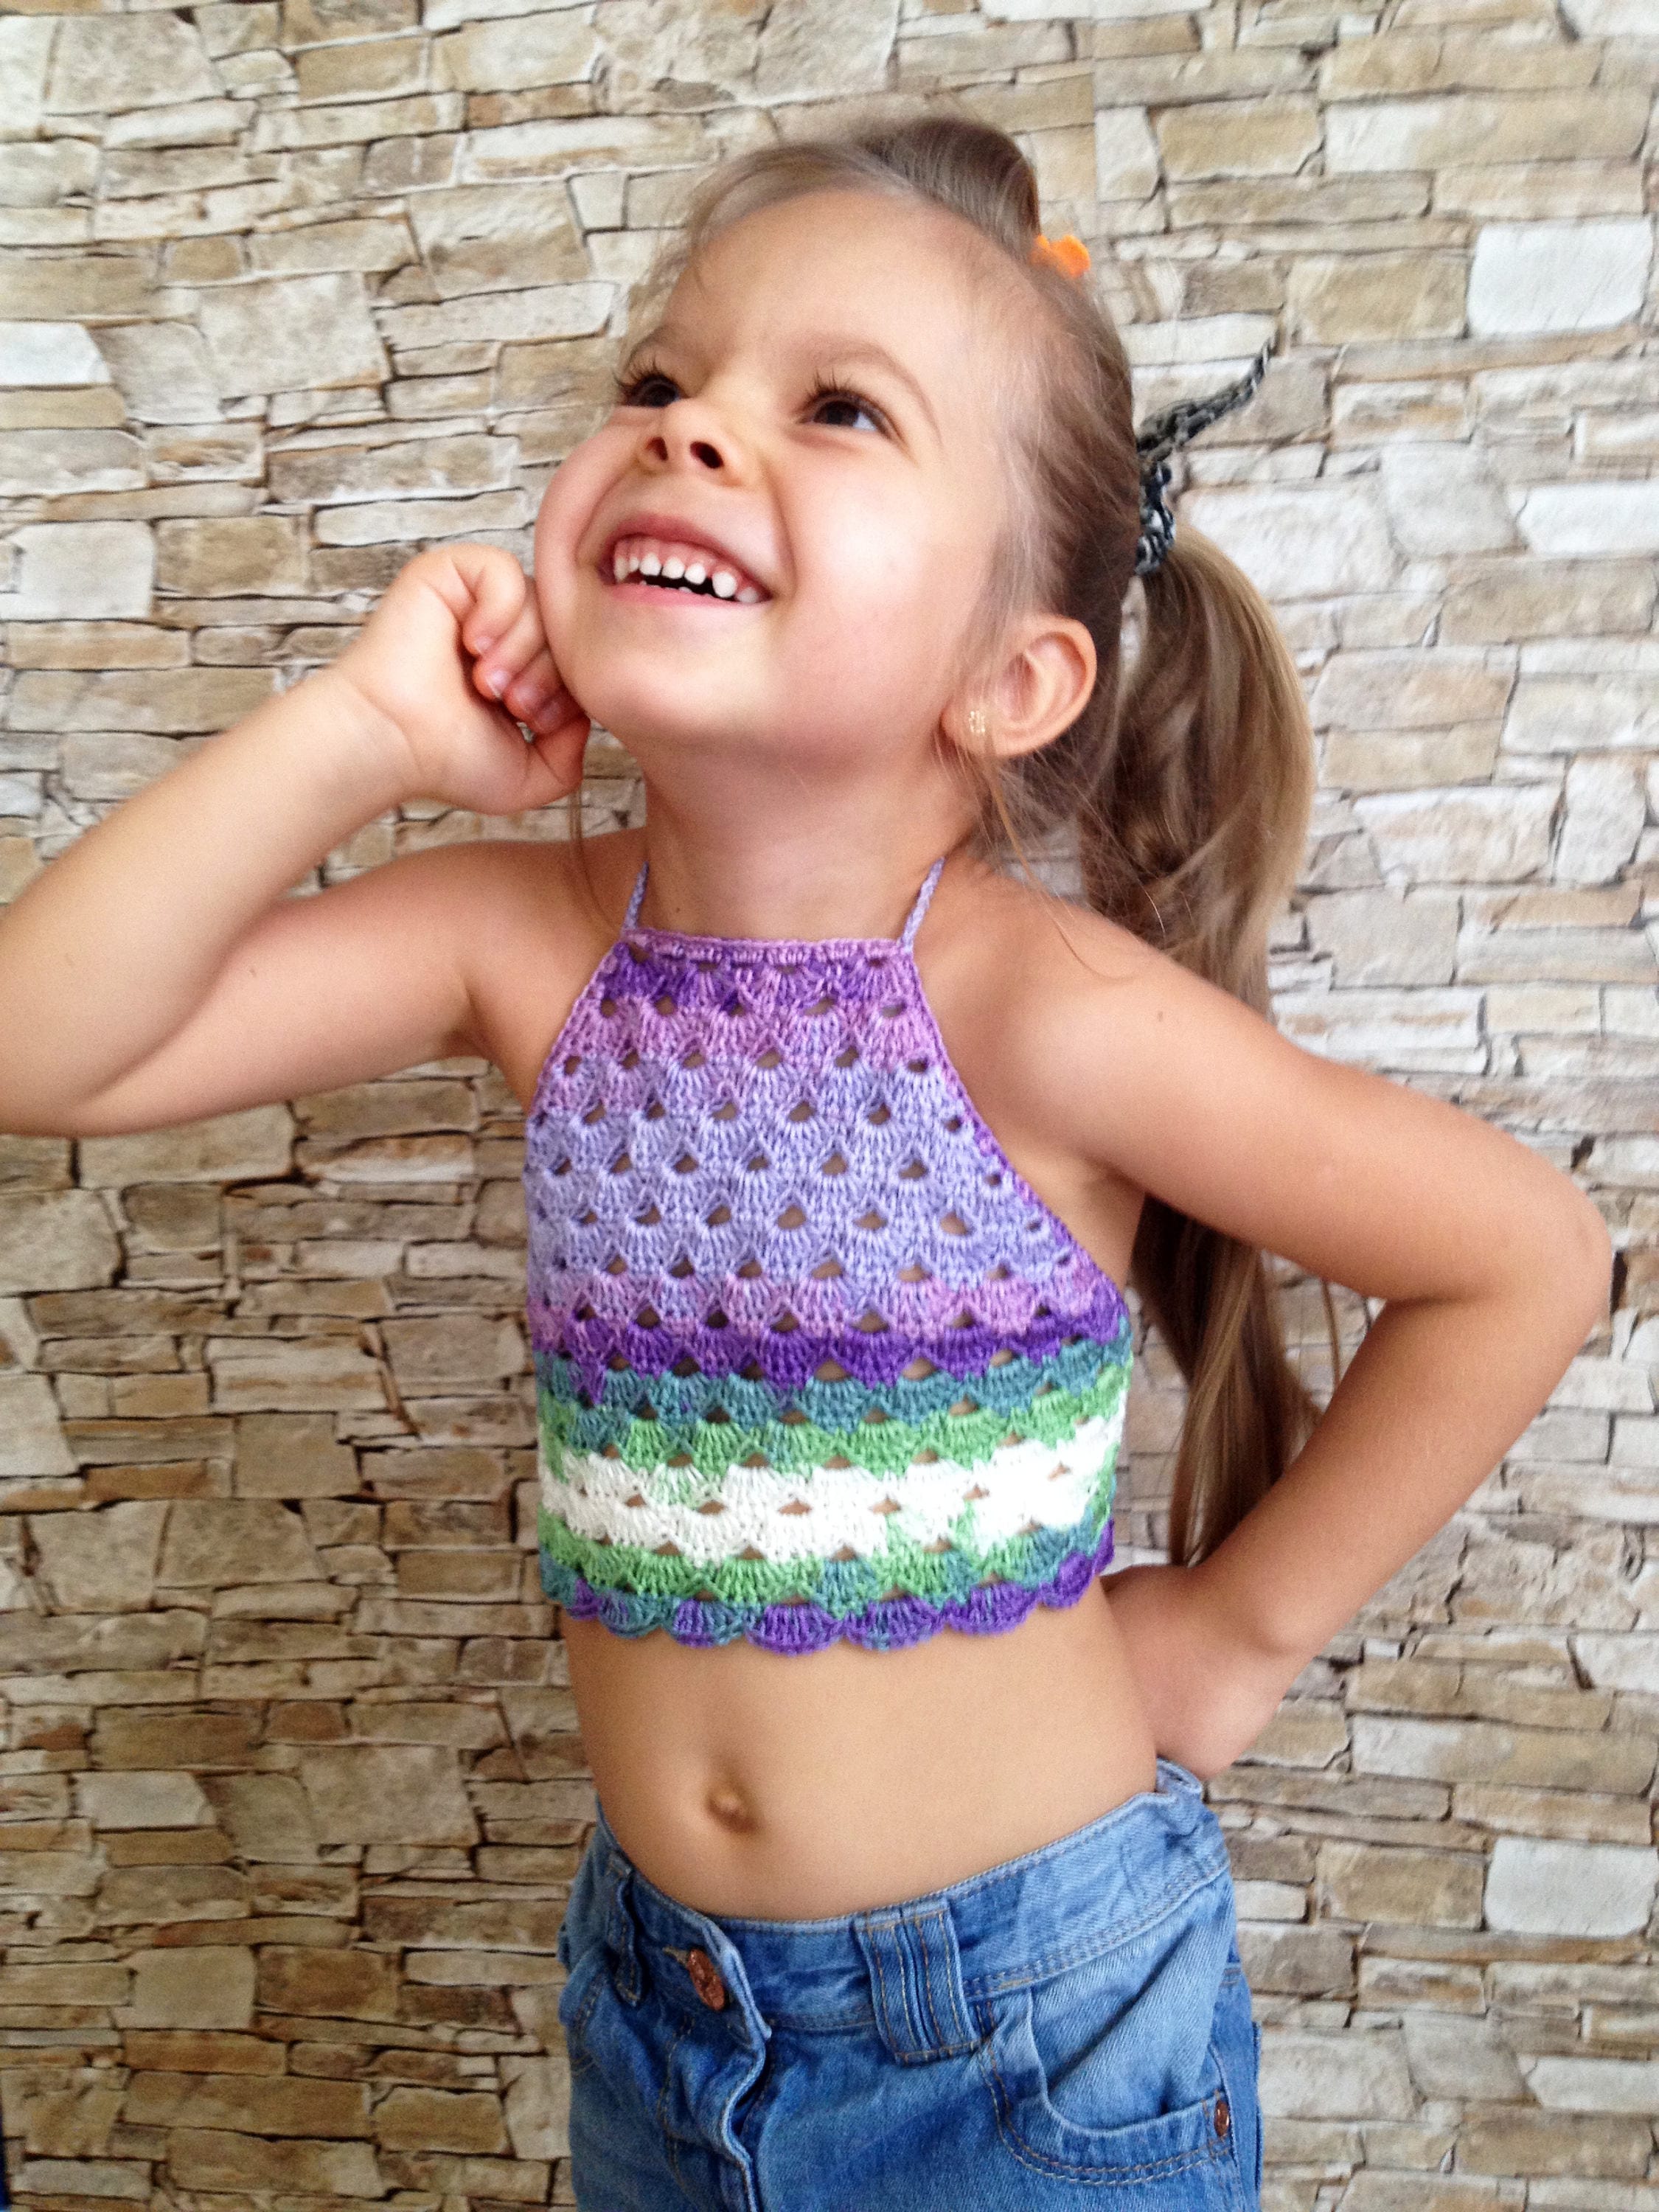 Crochet baby toddler lace top Crocheted open back top Purple | Etsy